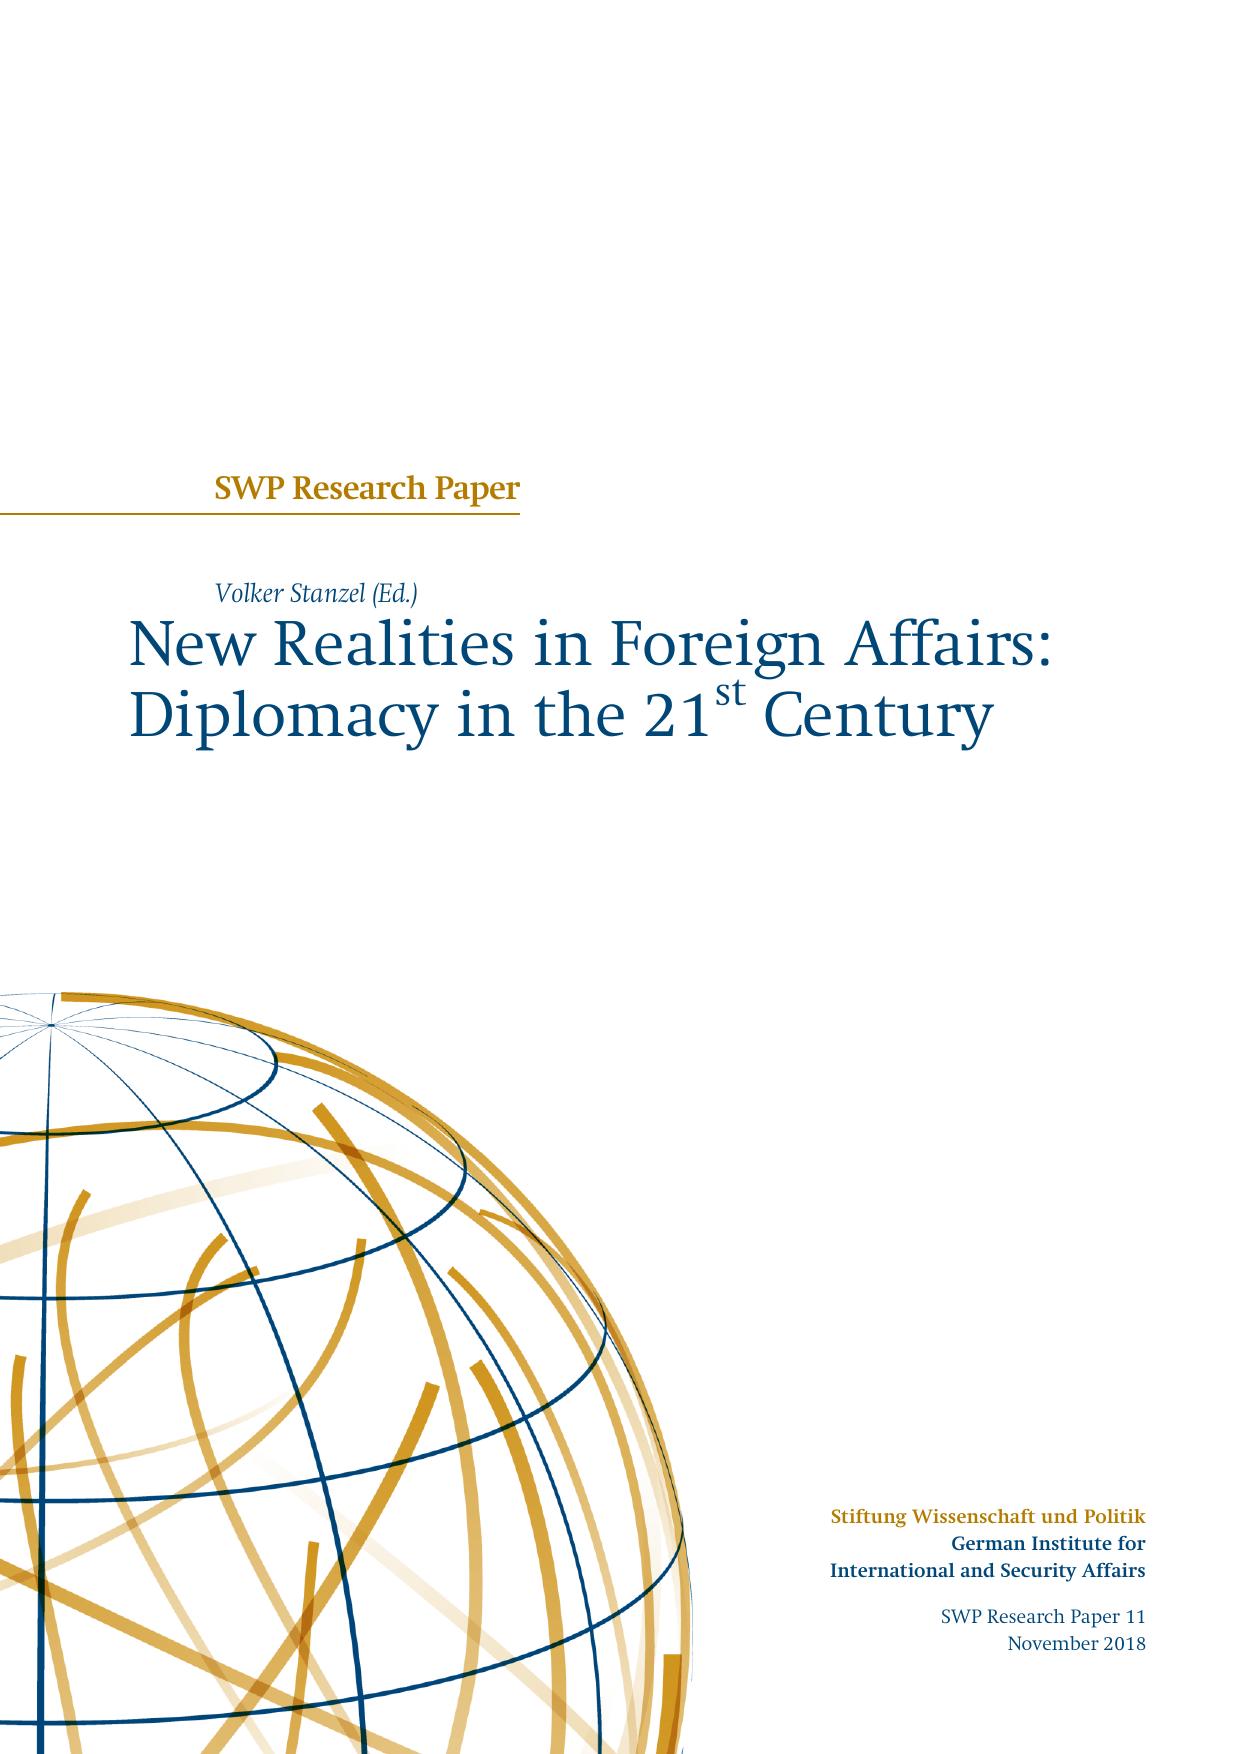 New Realities in Foreign Affairs: Diplomacy in the 21st Century